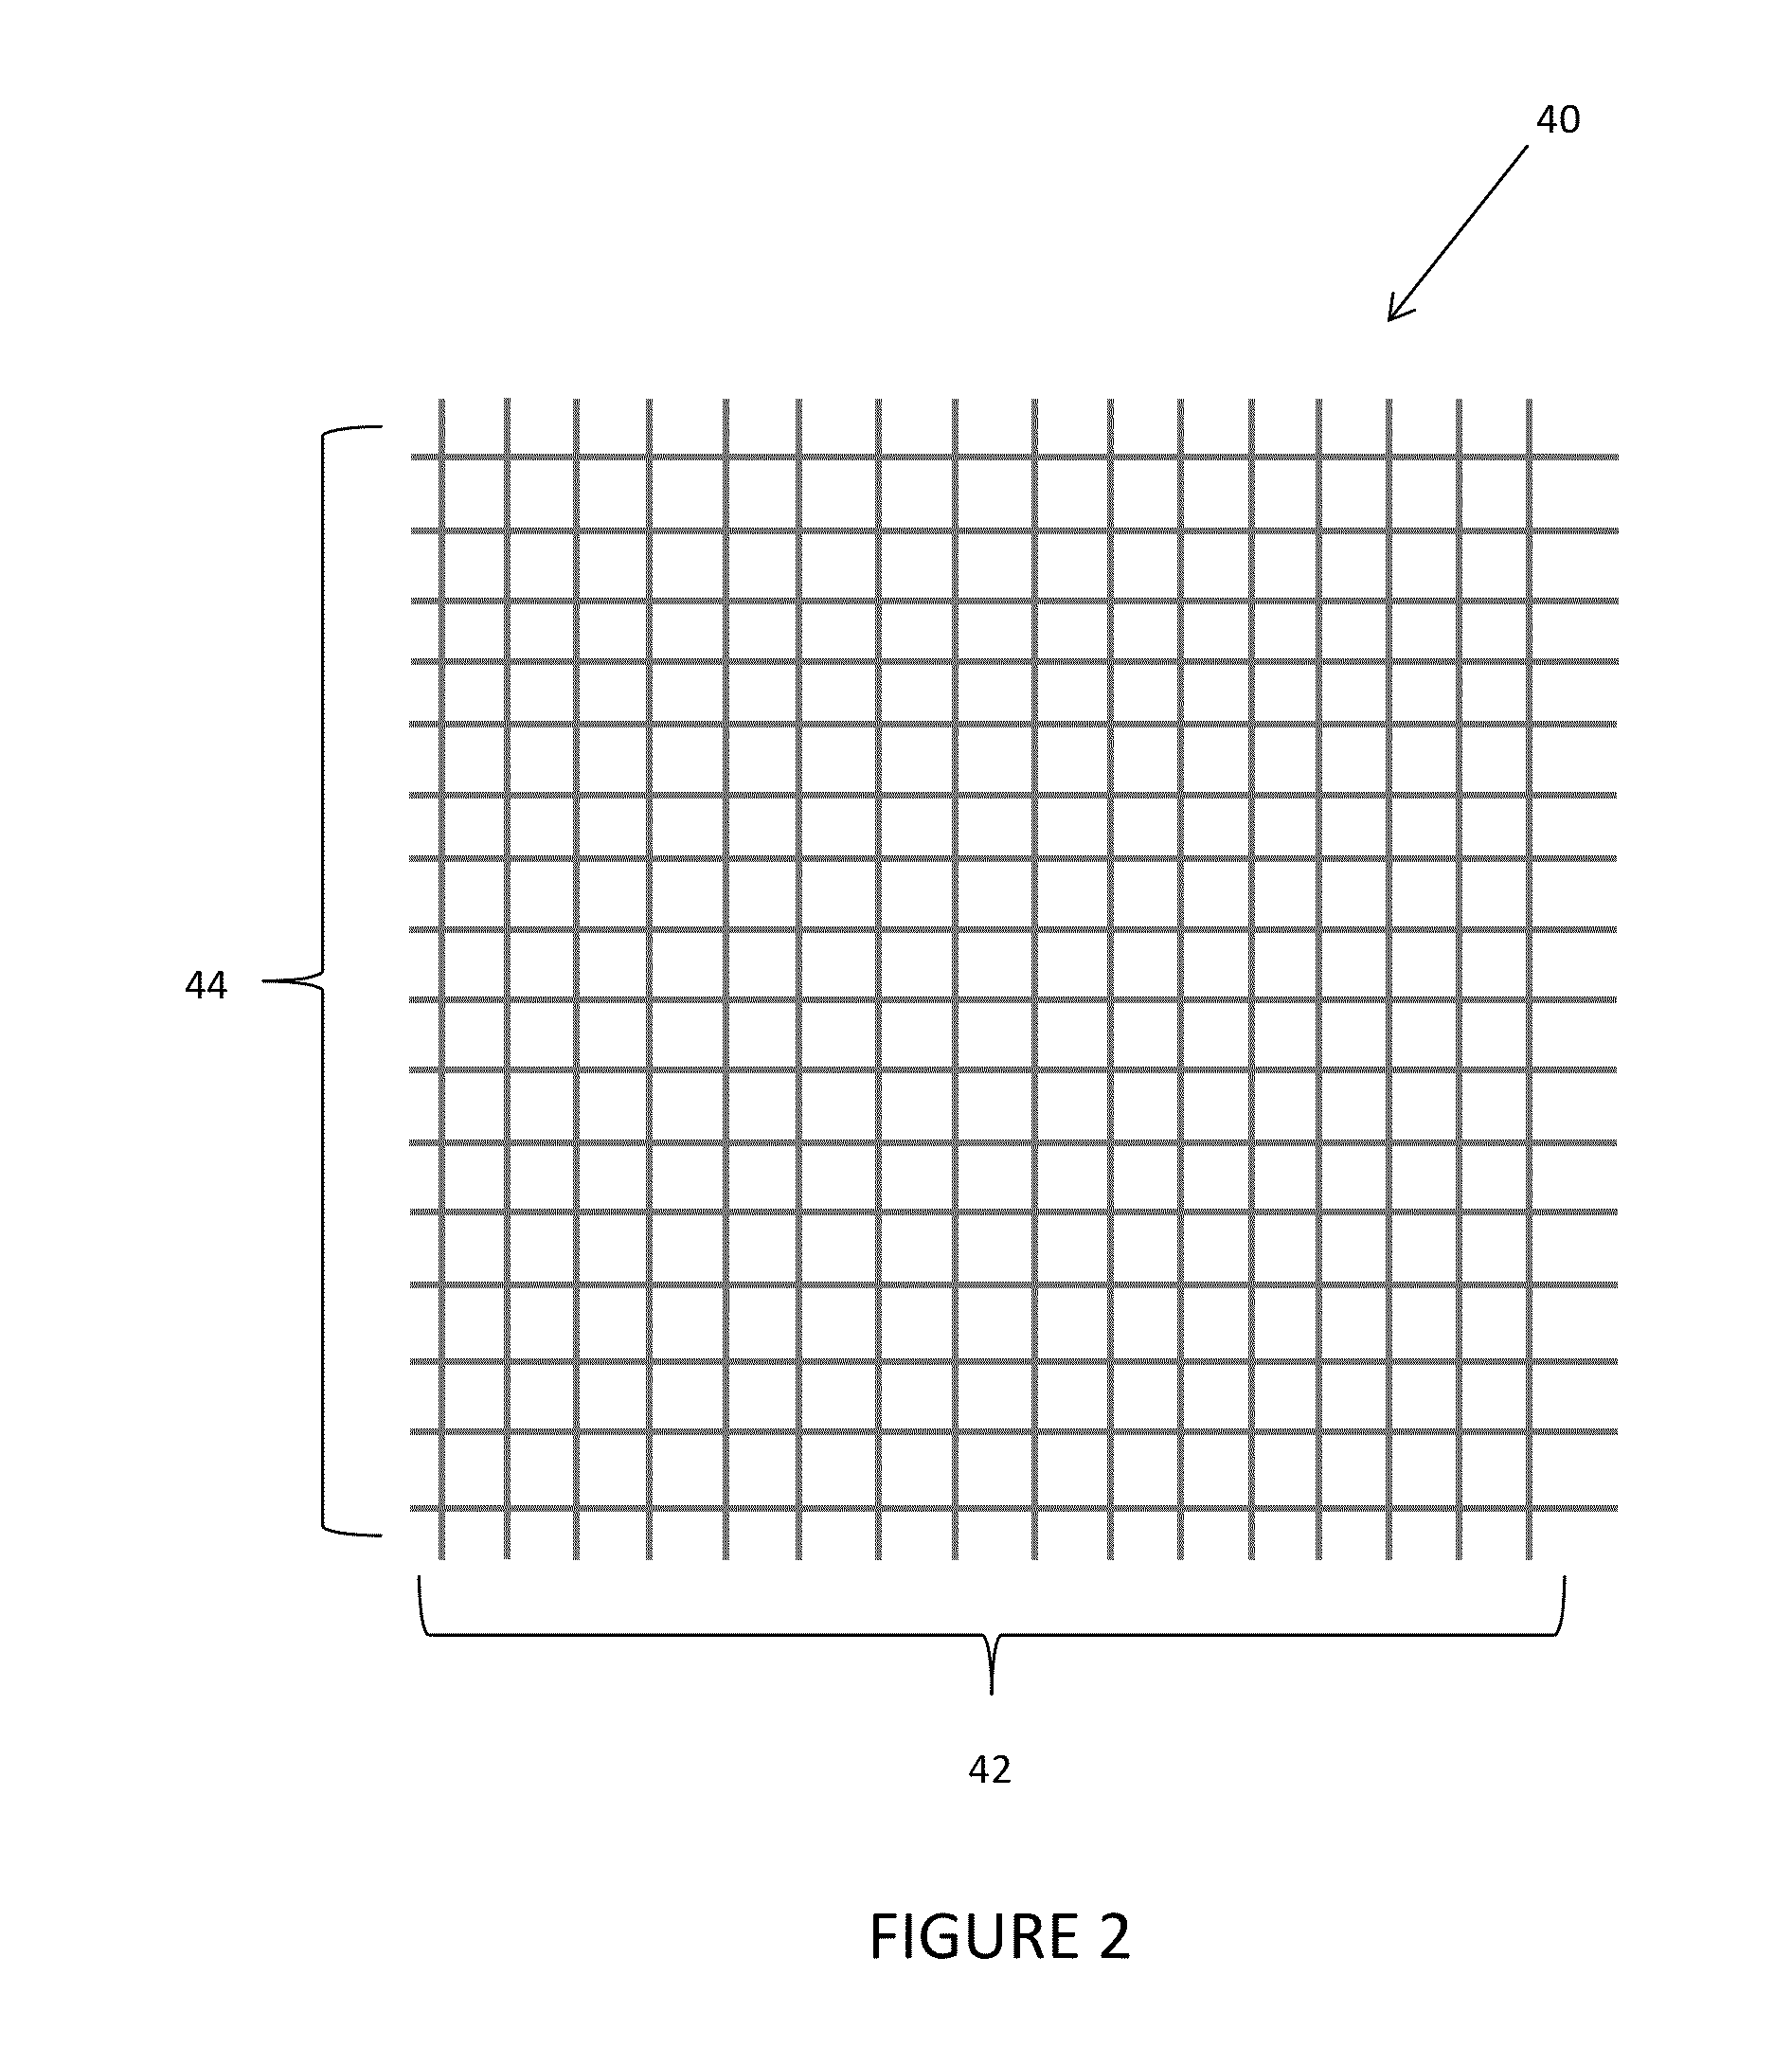 System for using synchronized timed orthogonal measurement patterns to enable high update report rates on a large capacitive touch screen